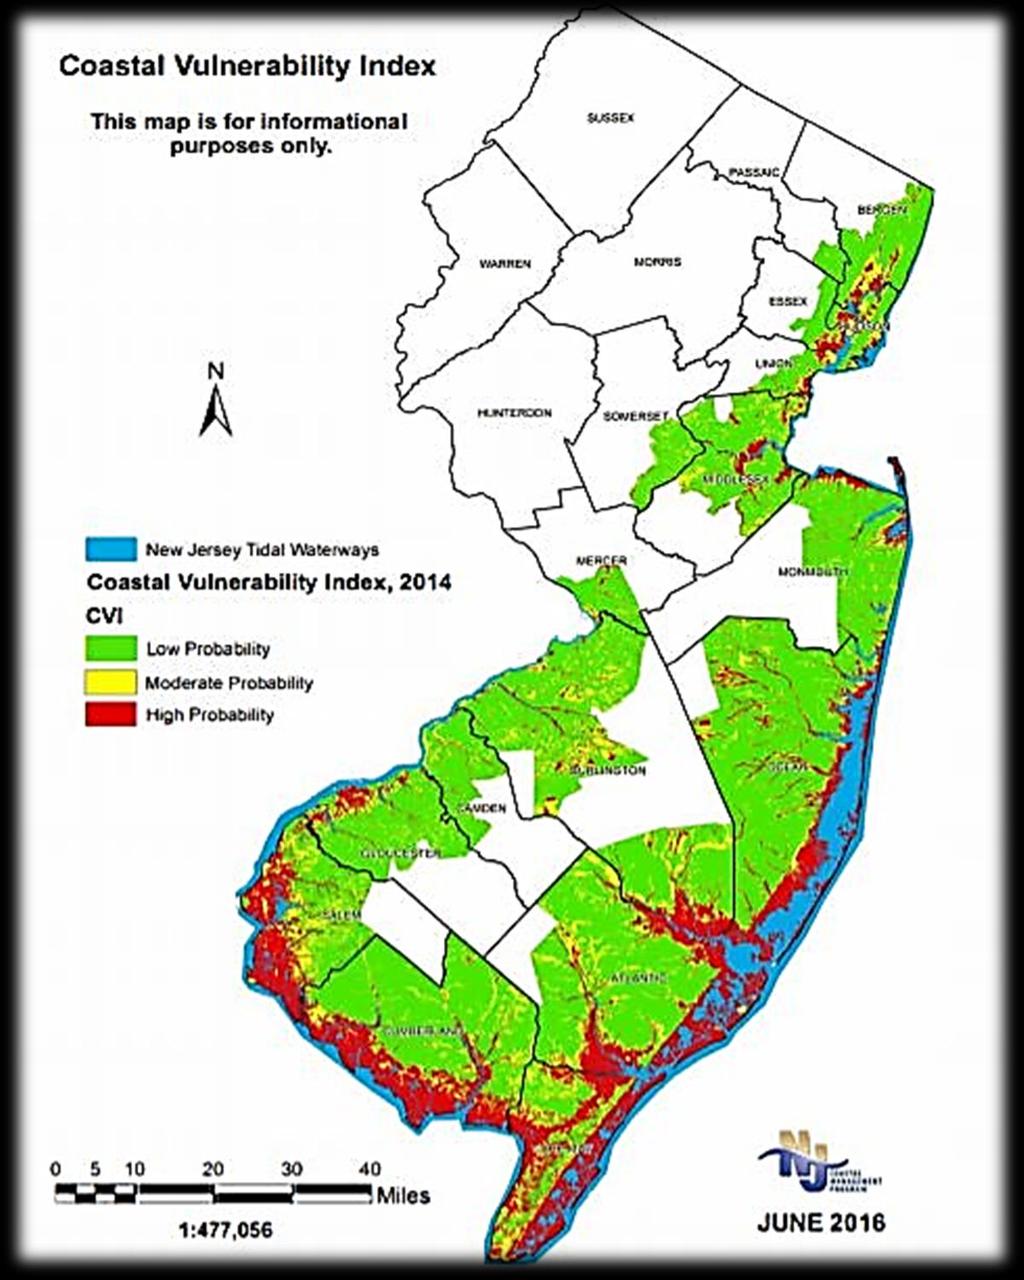 Coastal Vulnerability Index CVI mapping has been prepared for the entire coastal area in New Jersey covering